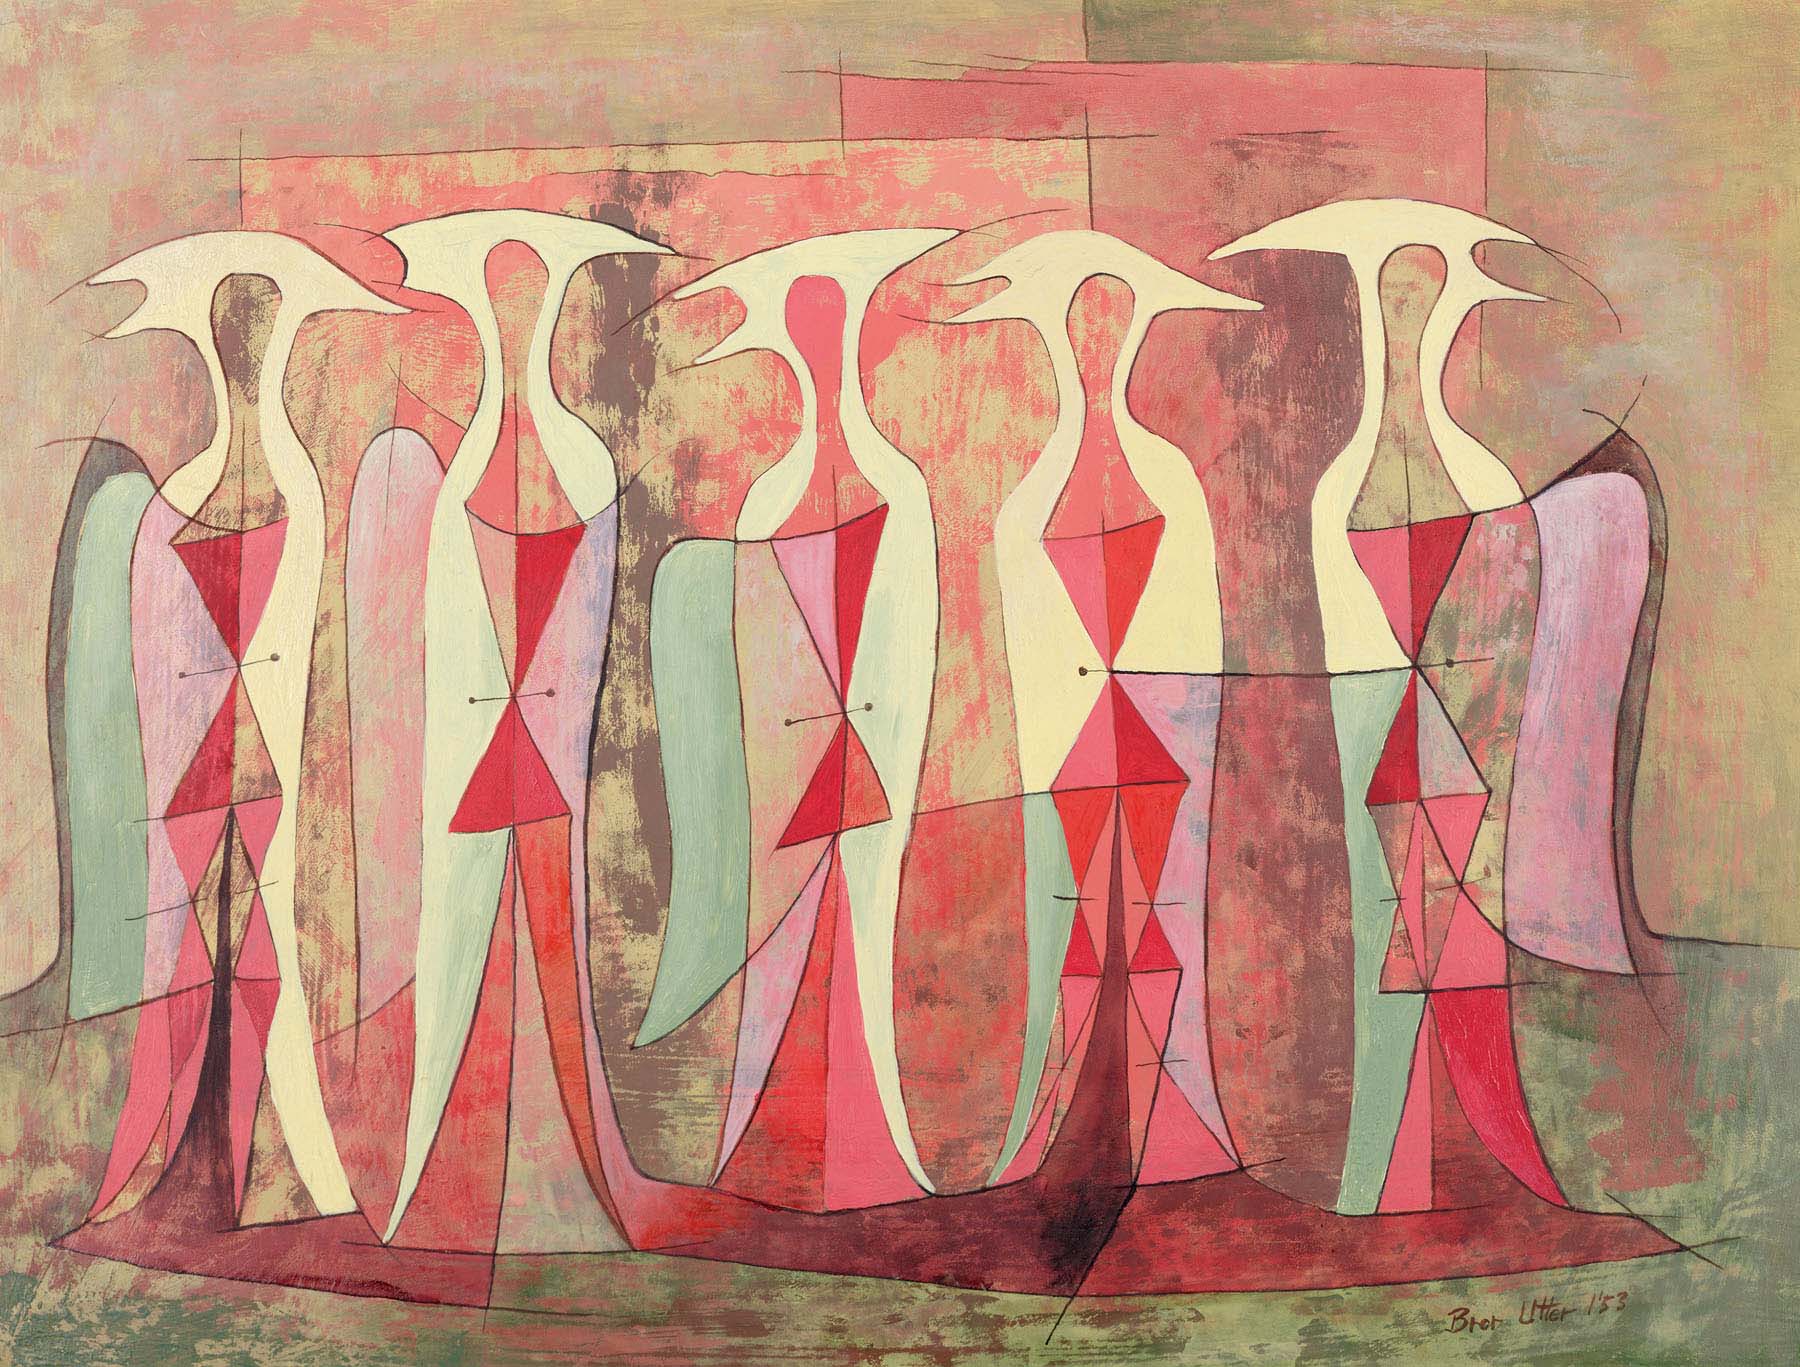 An abstract oil painting of five, soft colored bird-like figures standing side by side in landscape orientation.